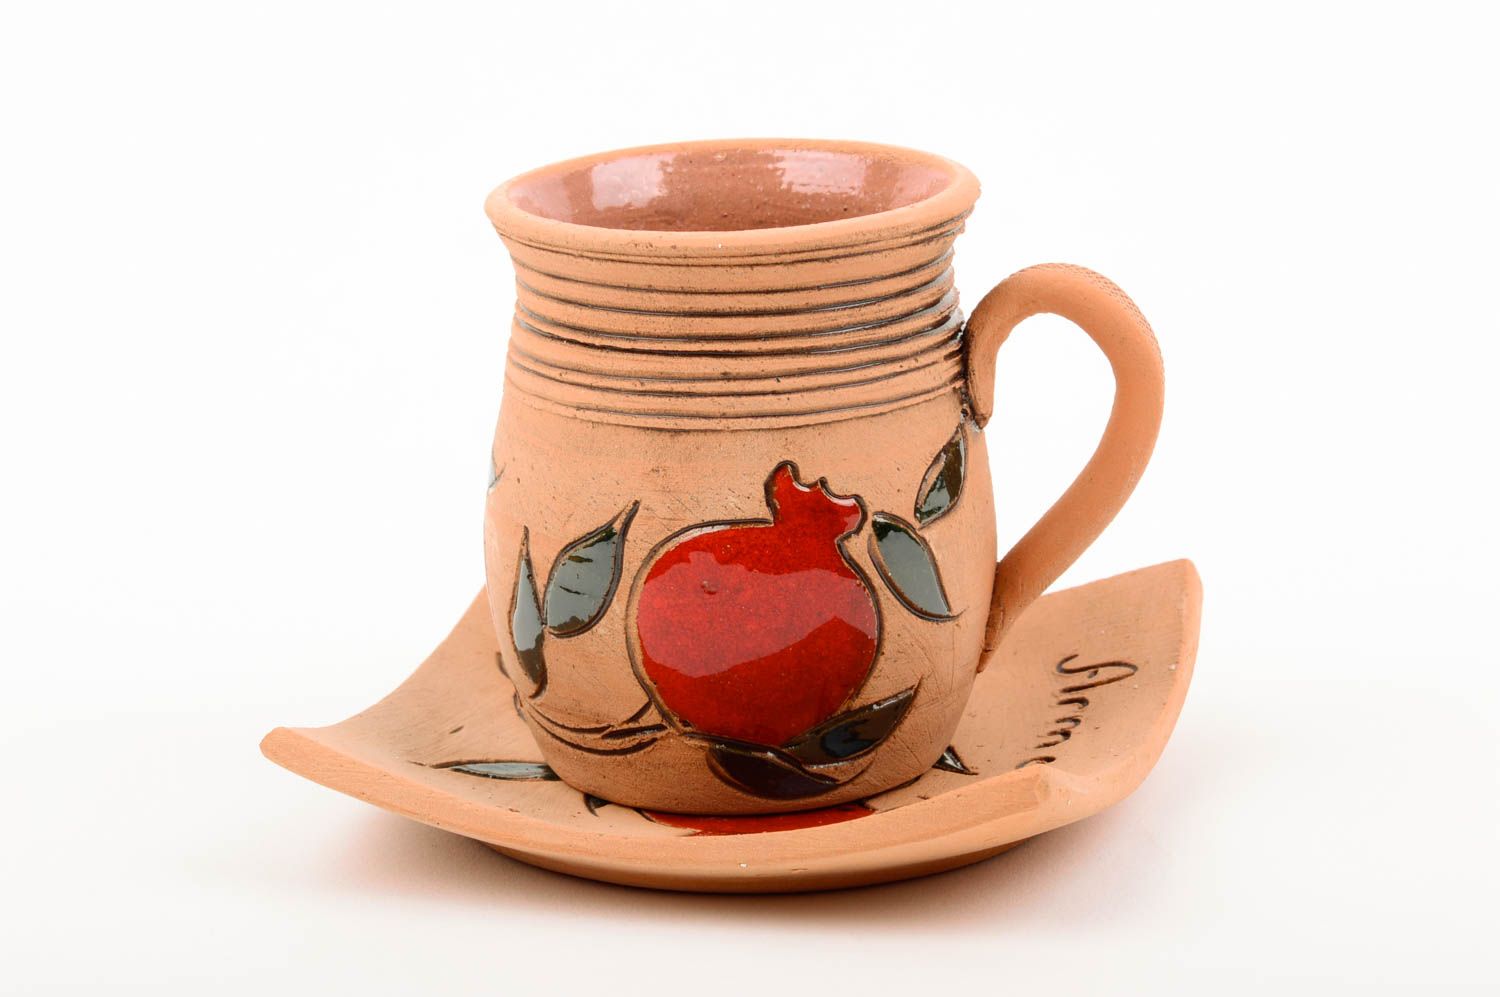 5oz Ceramic Mug with Rim and Hand Painting Handle for Espresso Cup